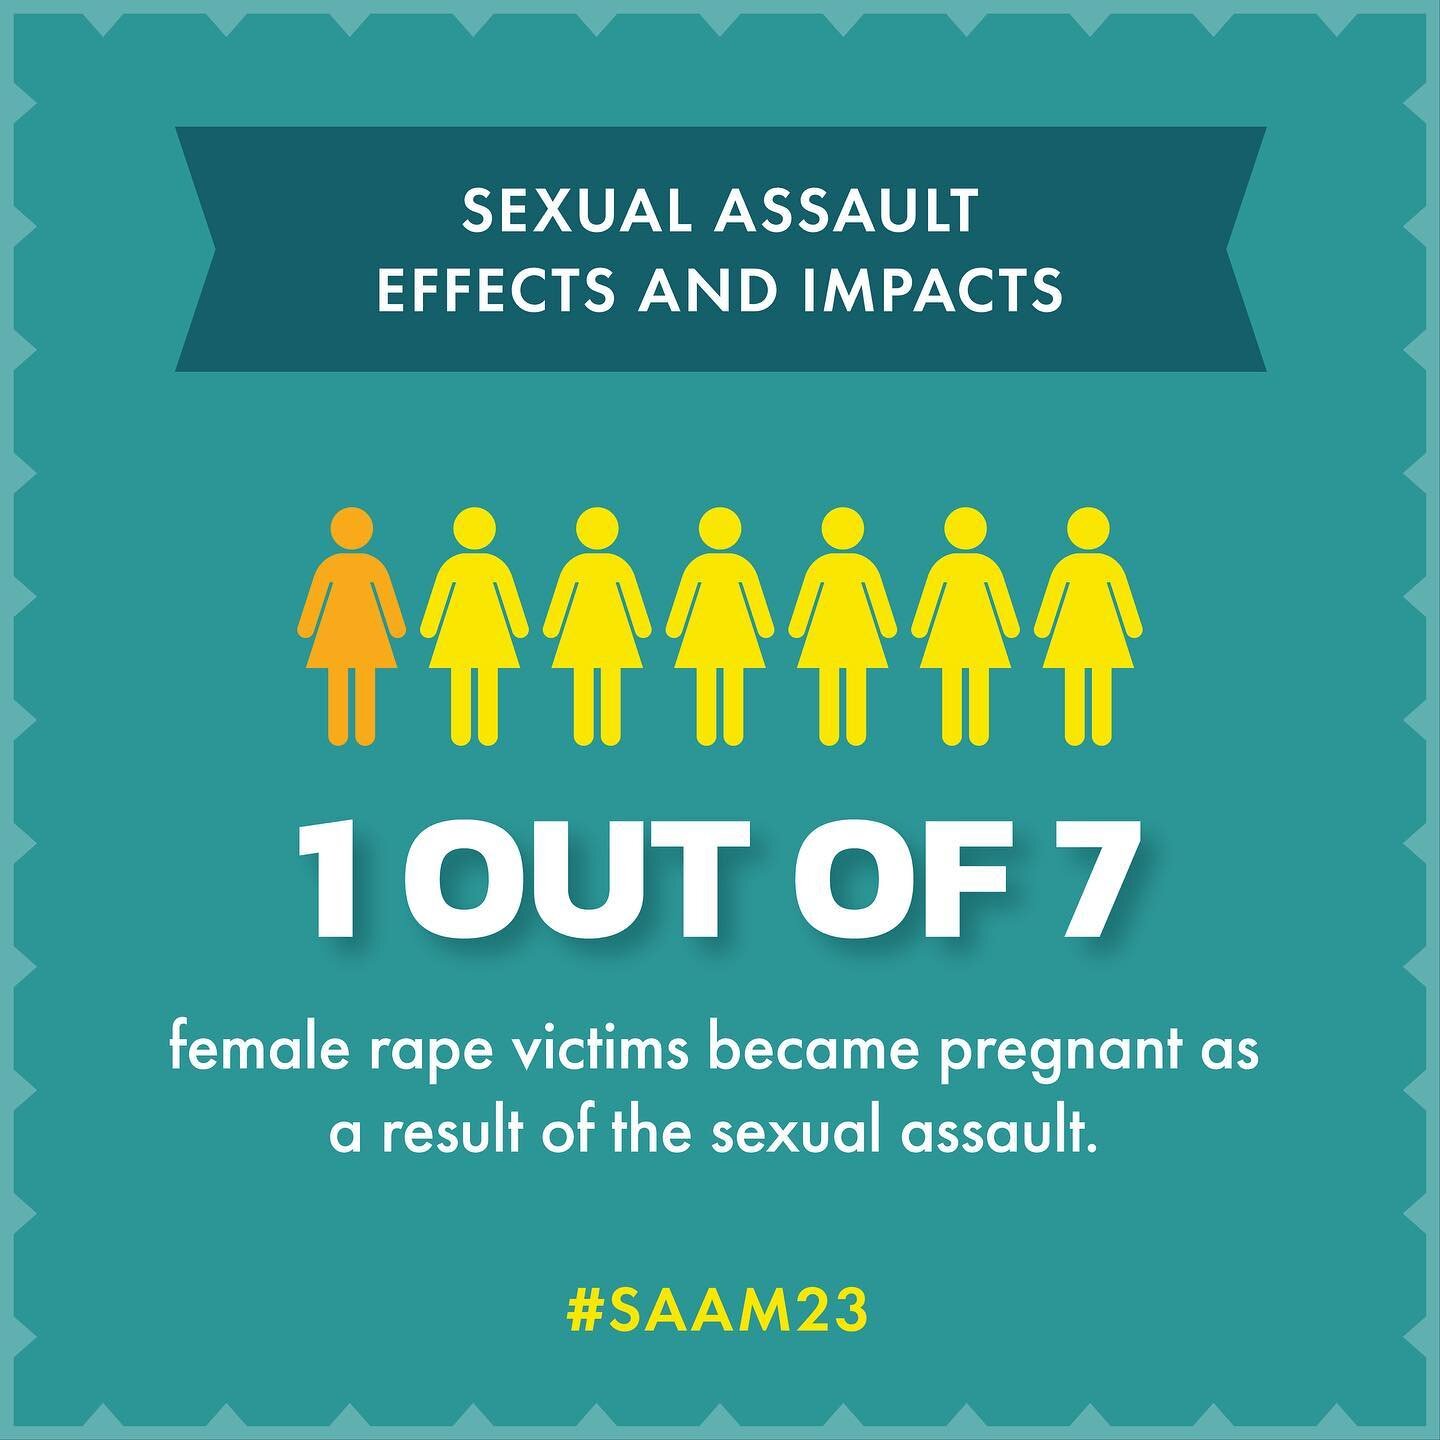 Sexual assaults are a traumatic experience for those that experience them. Some of the effects and impacts may include pregnancy or injuries as a result of the assault. Supporting survivors after sexual violence is important to their healing journey 